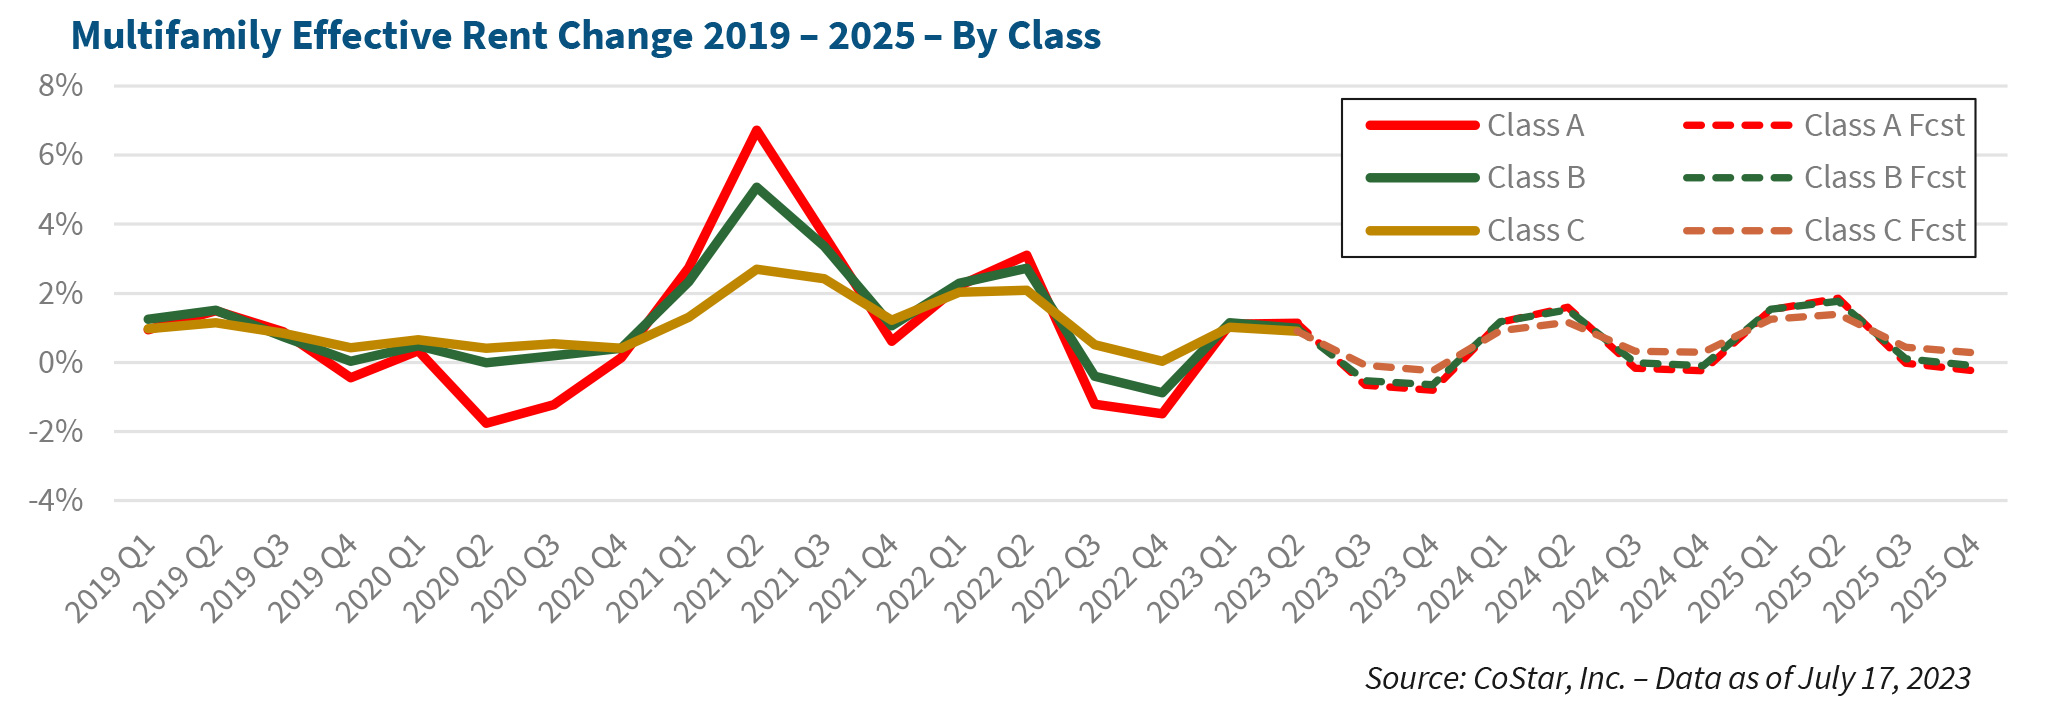 Multifamily Effective Rent Change 2019 – 2025 – By Class